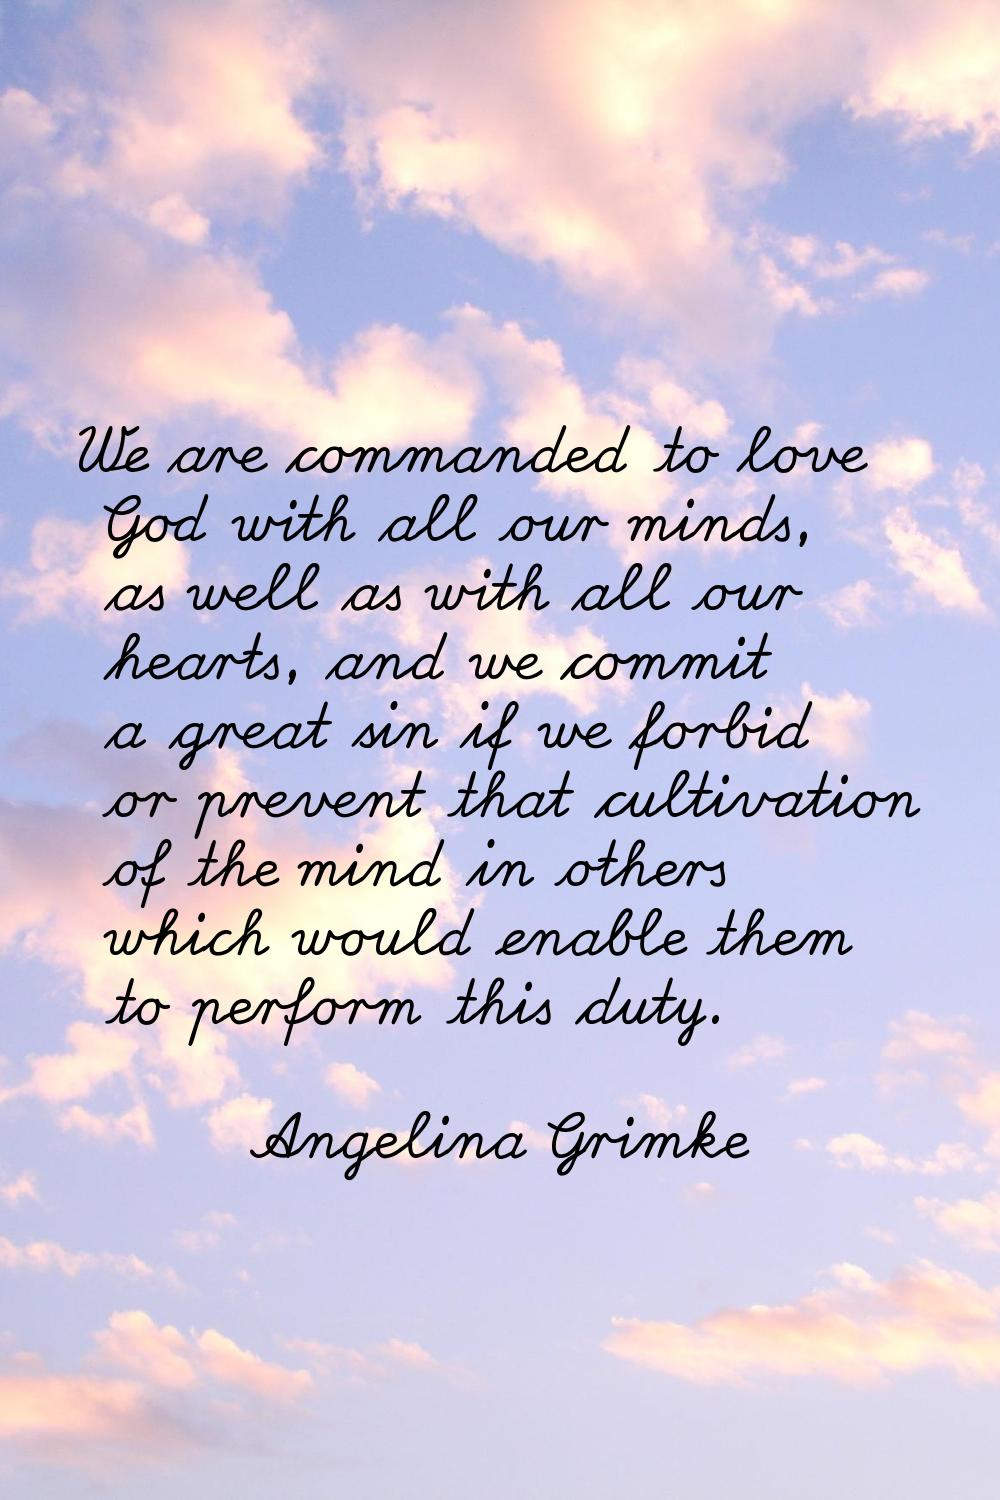 We are commanded to love God with all our minds, as well as with all our hearts, and we commit a gr